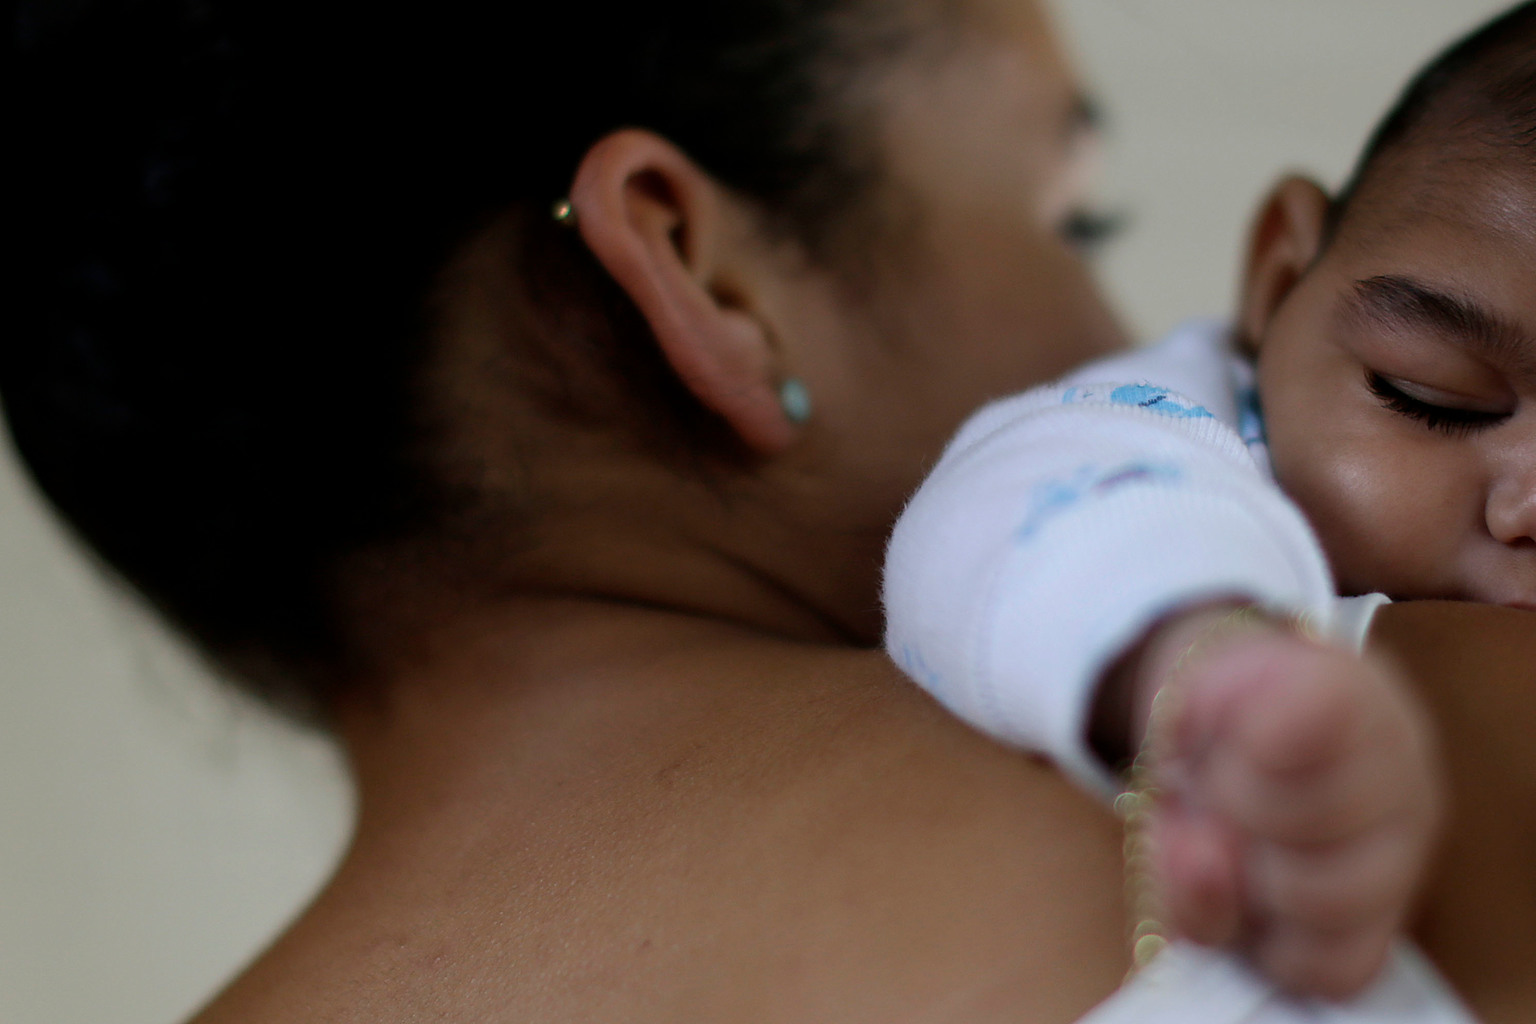 A 15-year-old mother holds her a 4-month old baby in Recife, Brazil. The mother was infected with Zika, and the baby was born with born with microcephaly.